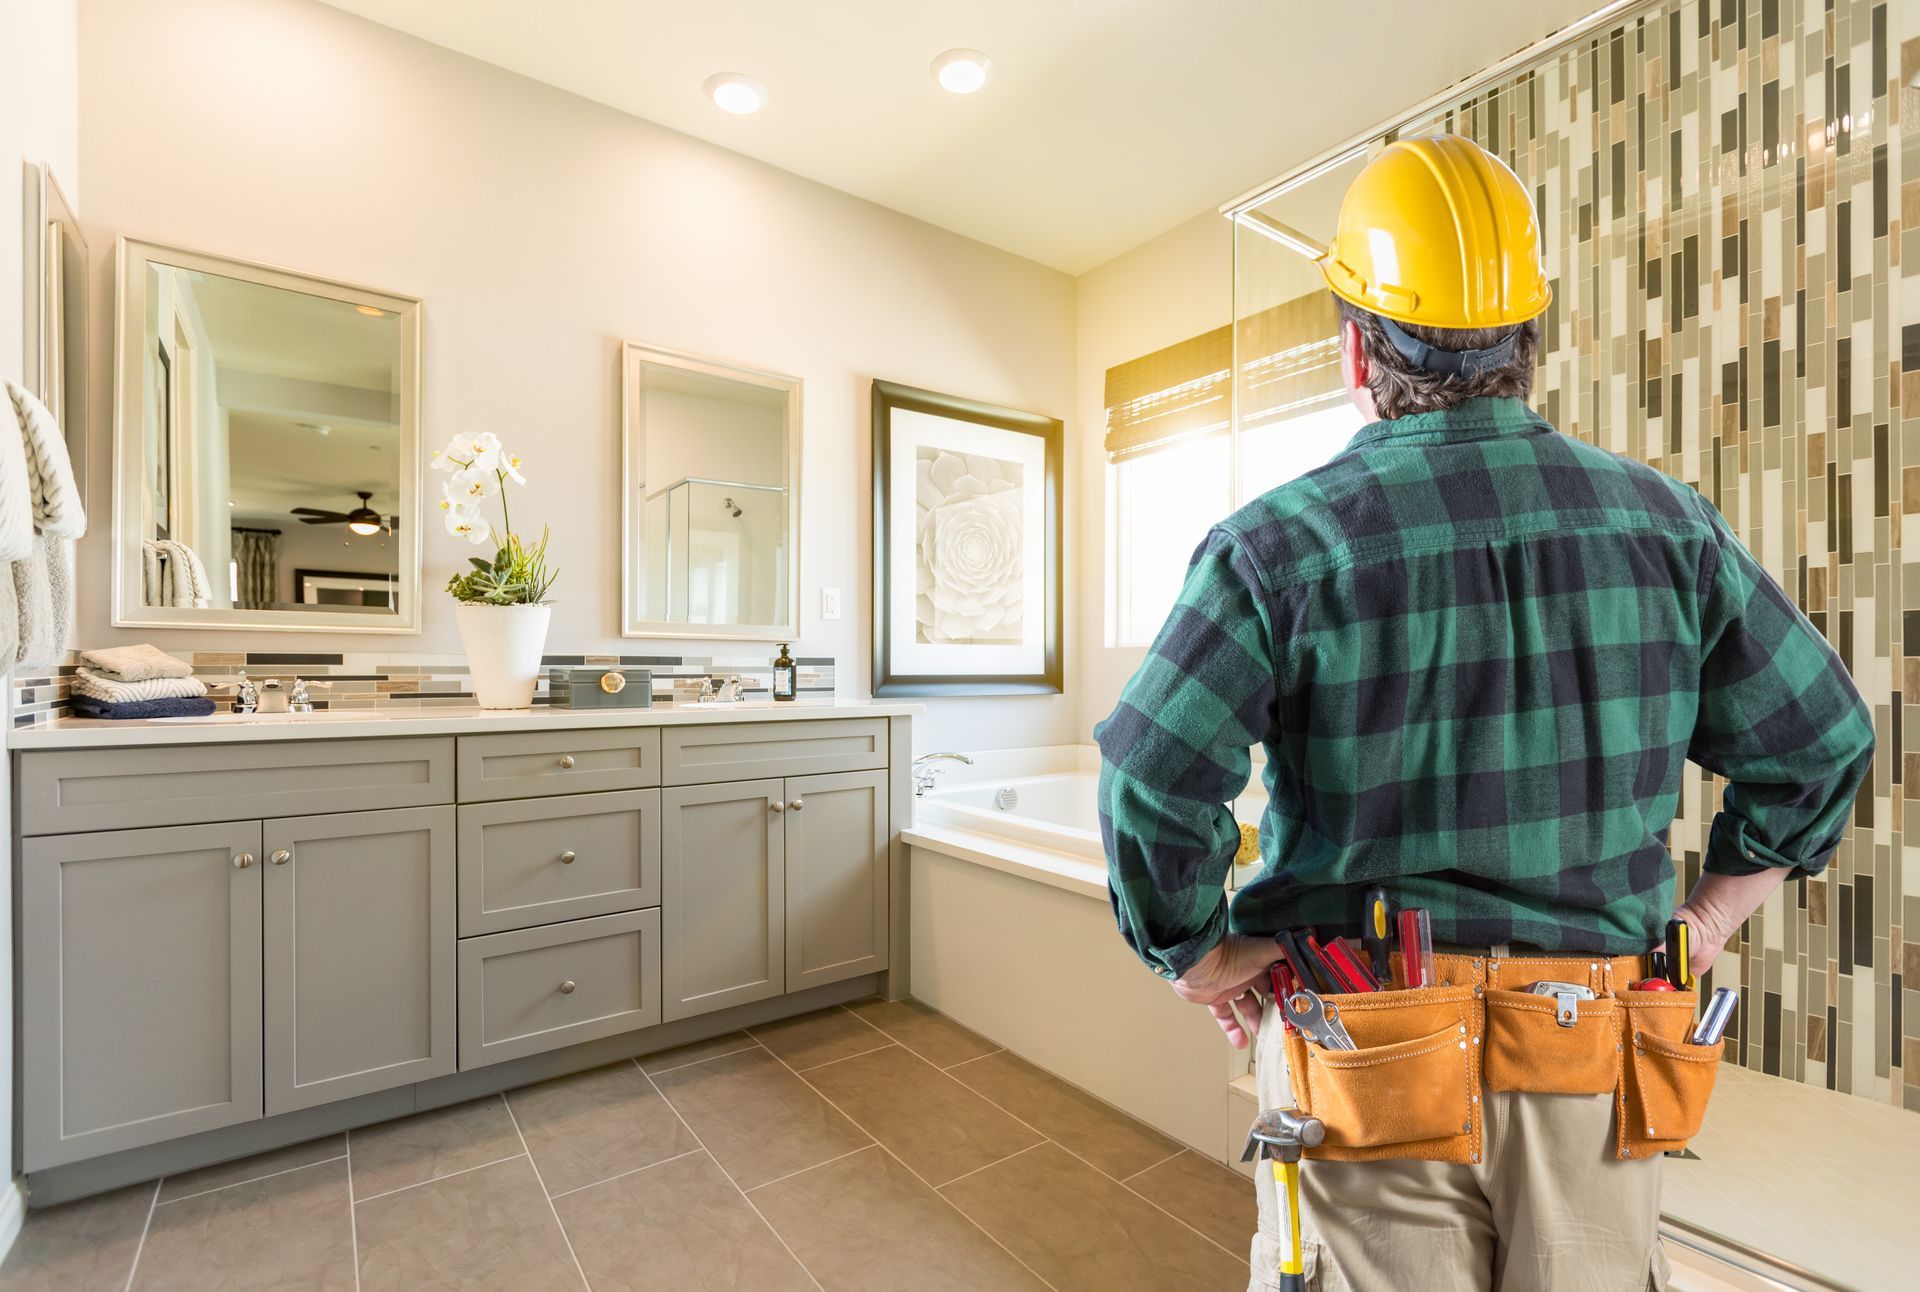 Contractor admiring a remodeled bathroom How Much Does It Really Cost to Remodel a Bathroom?